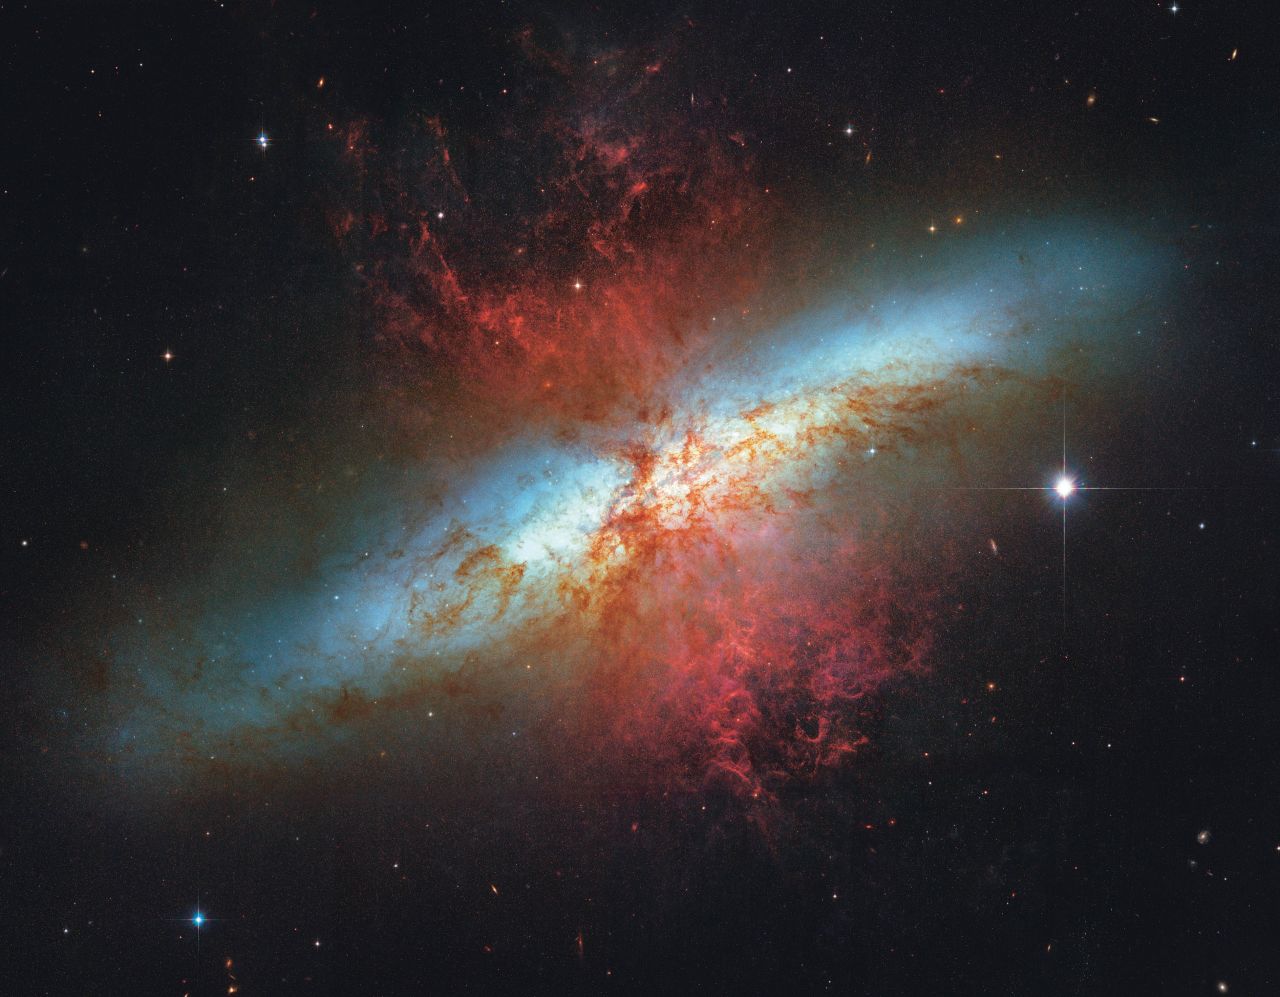 The Cigar Galaxy is 12 million light years away. It gets its name from its shape: From Earth it looks like an elongated elliptical disc.